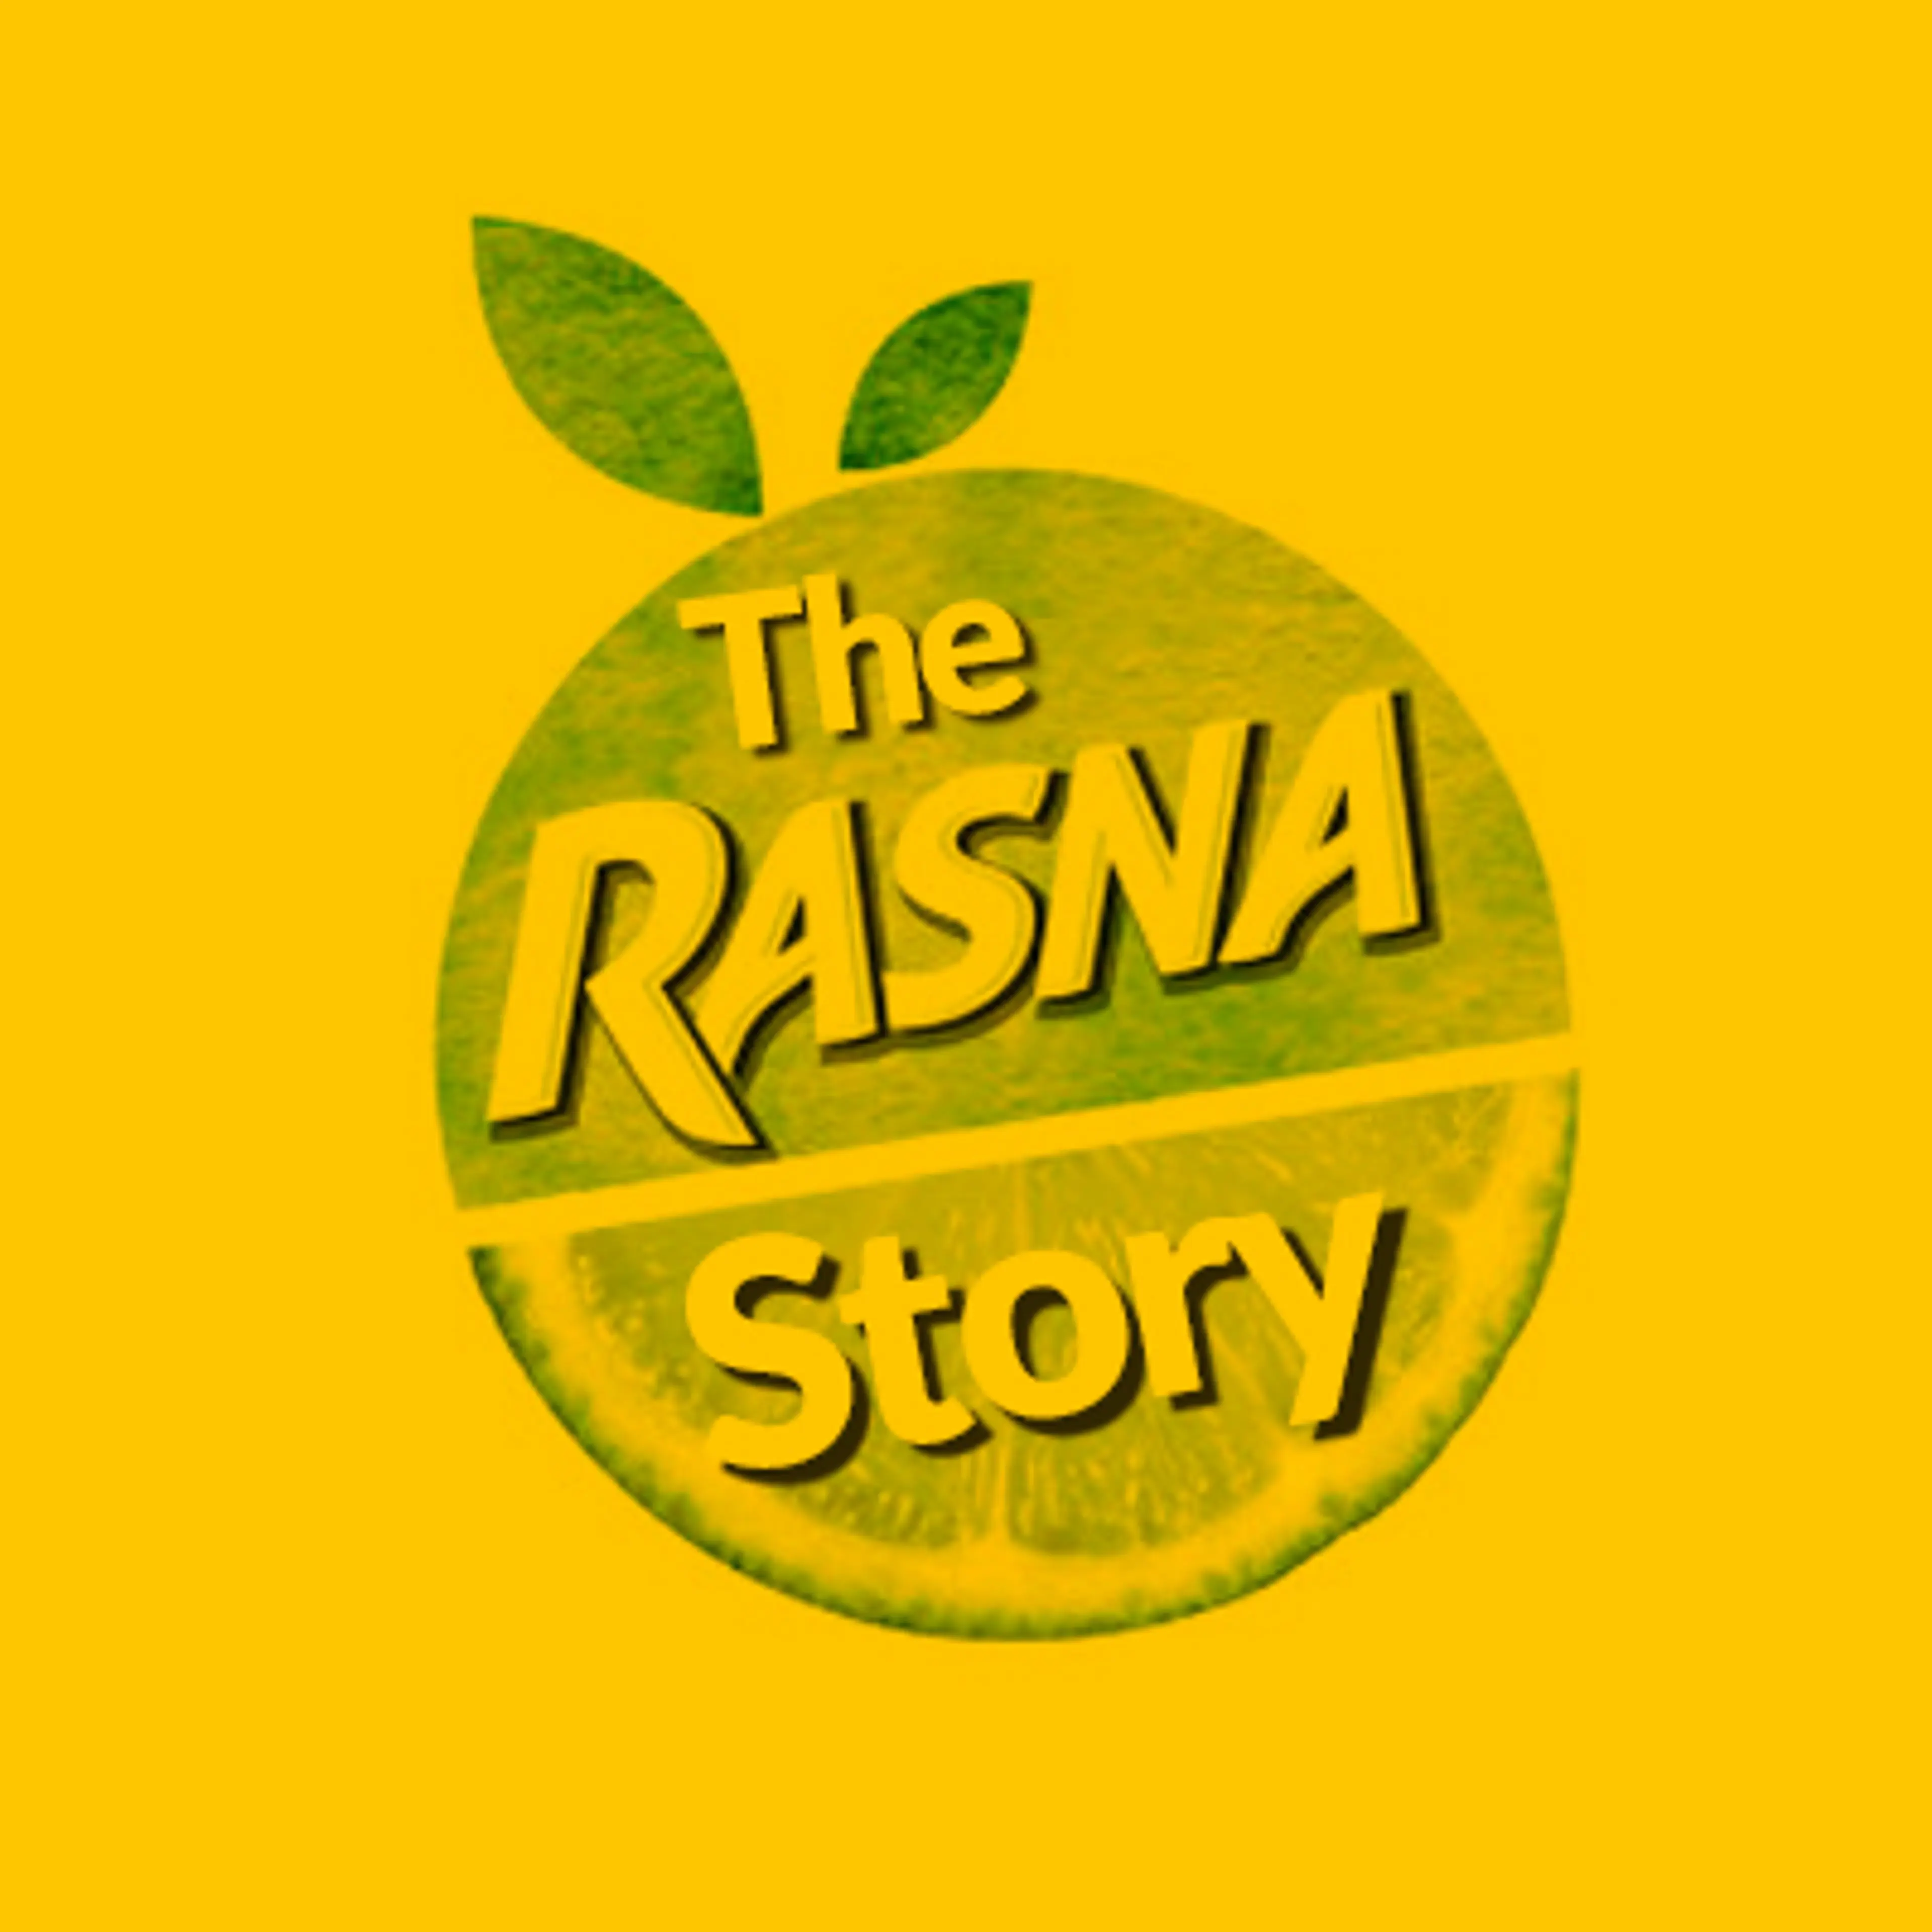 Remember Rasna? Here is their story!